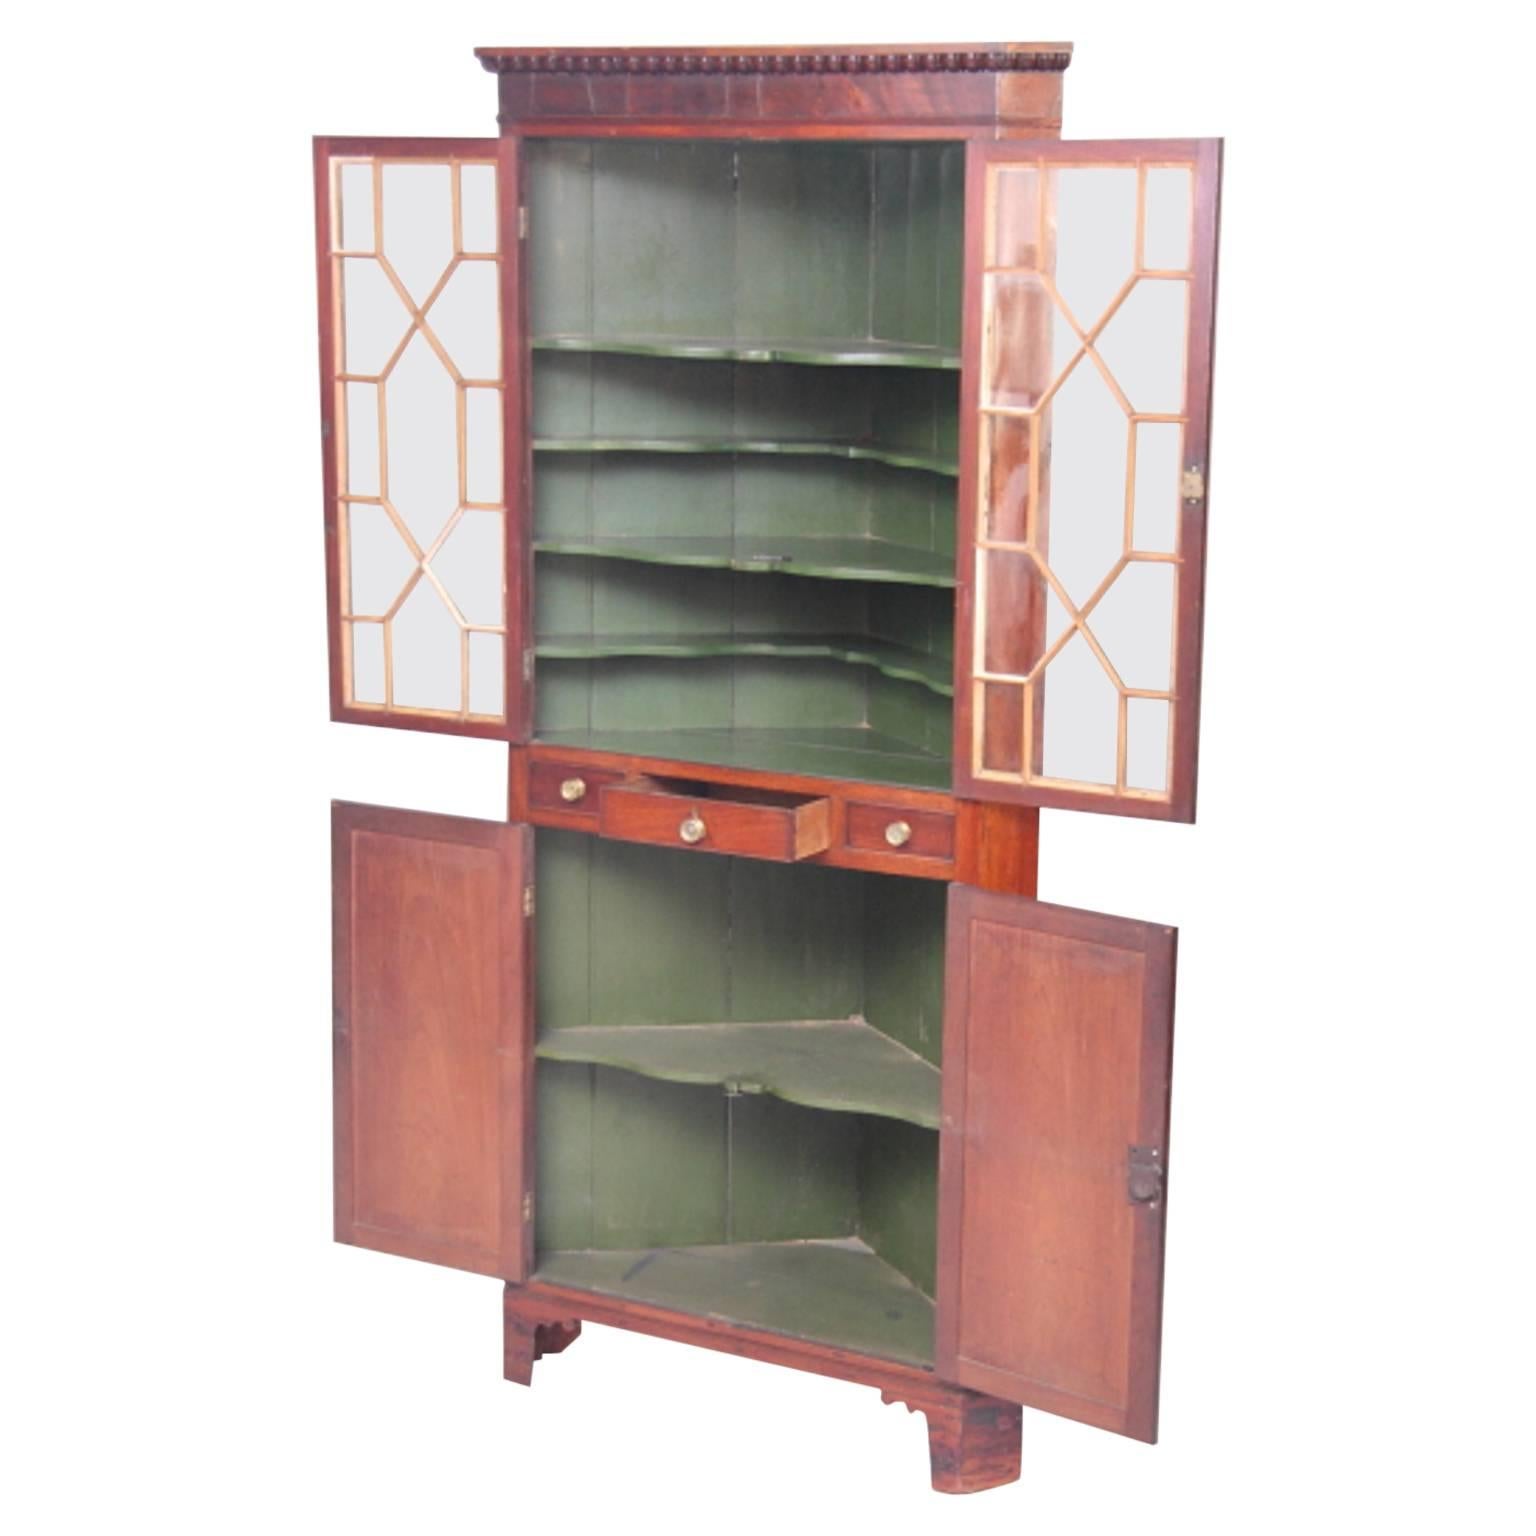 This is a superbly practical corner cabinet offering a large storage and display area whilst utilizing a small footprint, ideal for the smaller home. It has the advantage of being an 